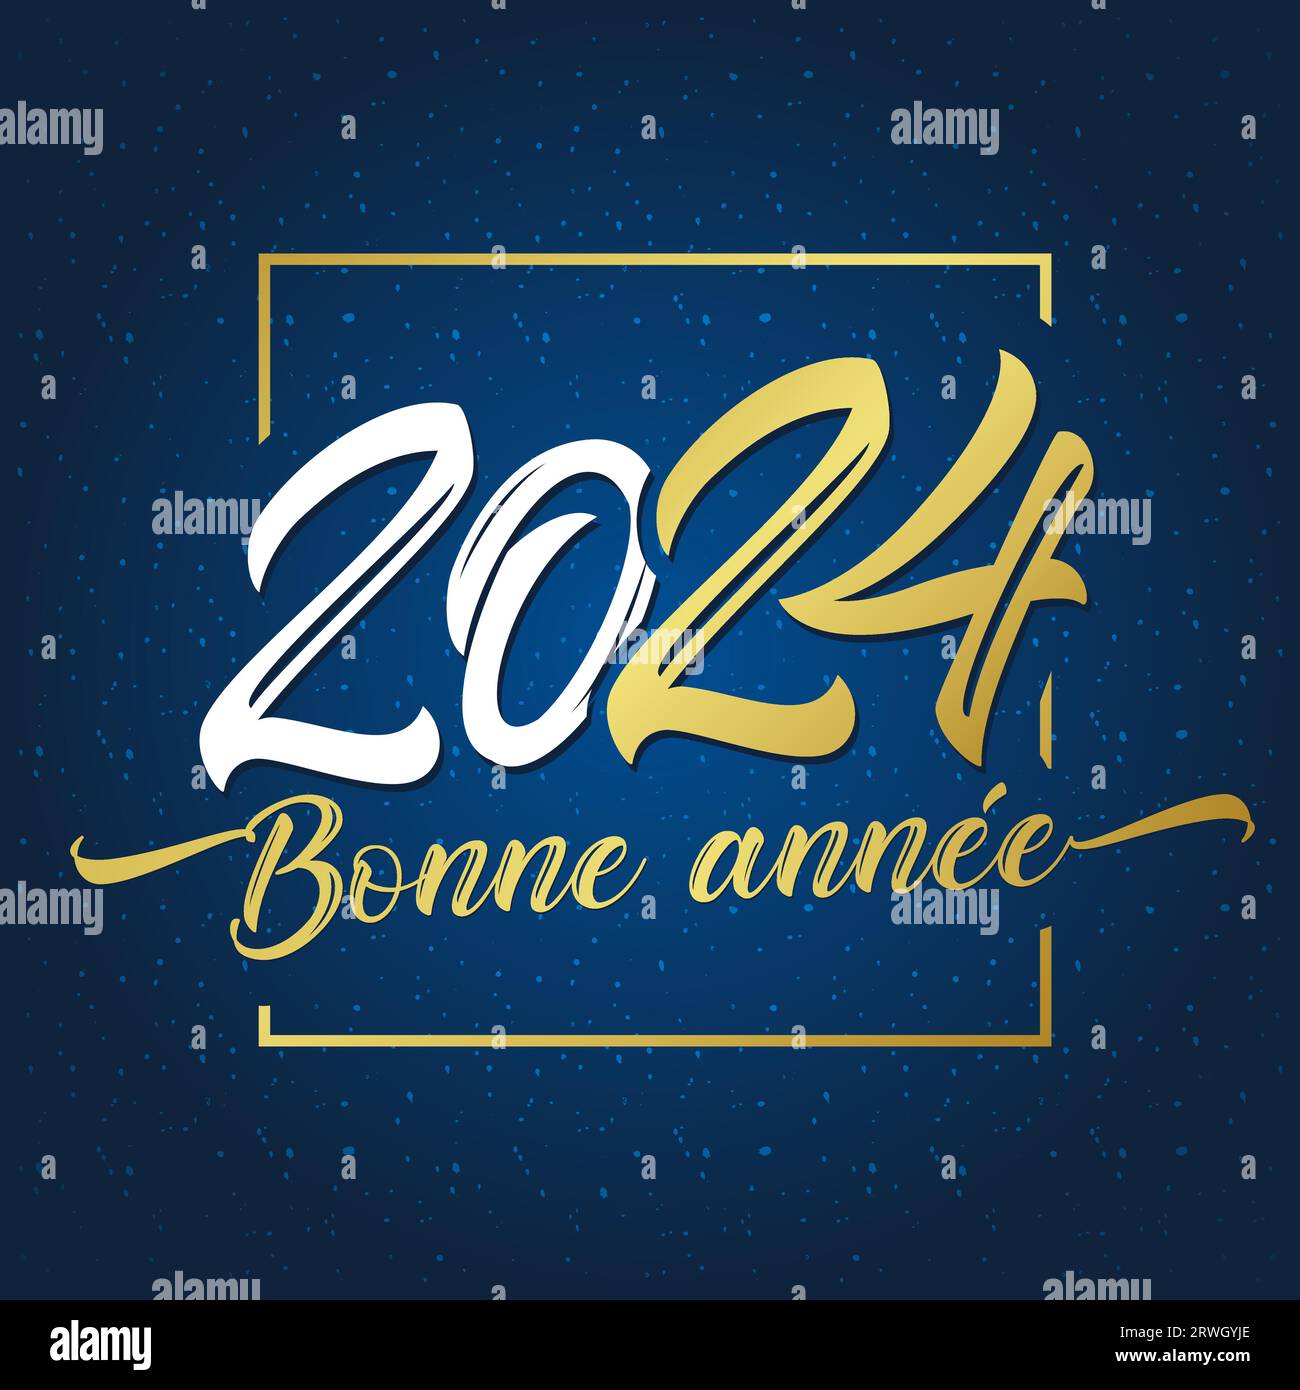 2024 french calendar hi-res stock photography and images - Alamy